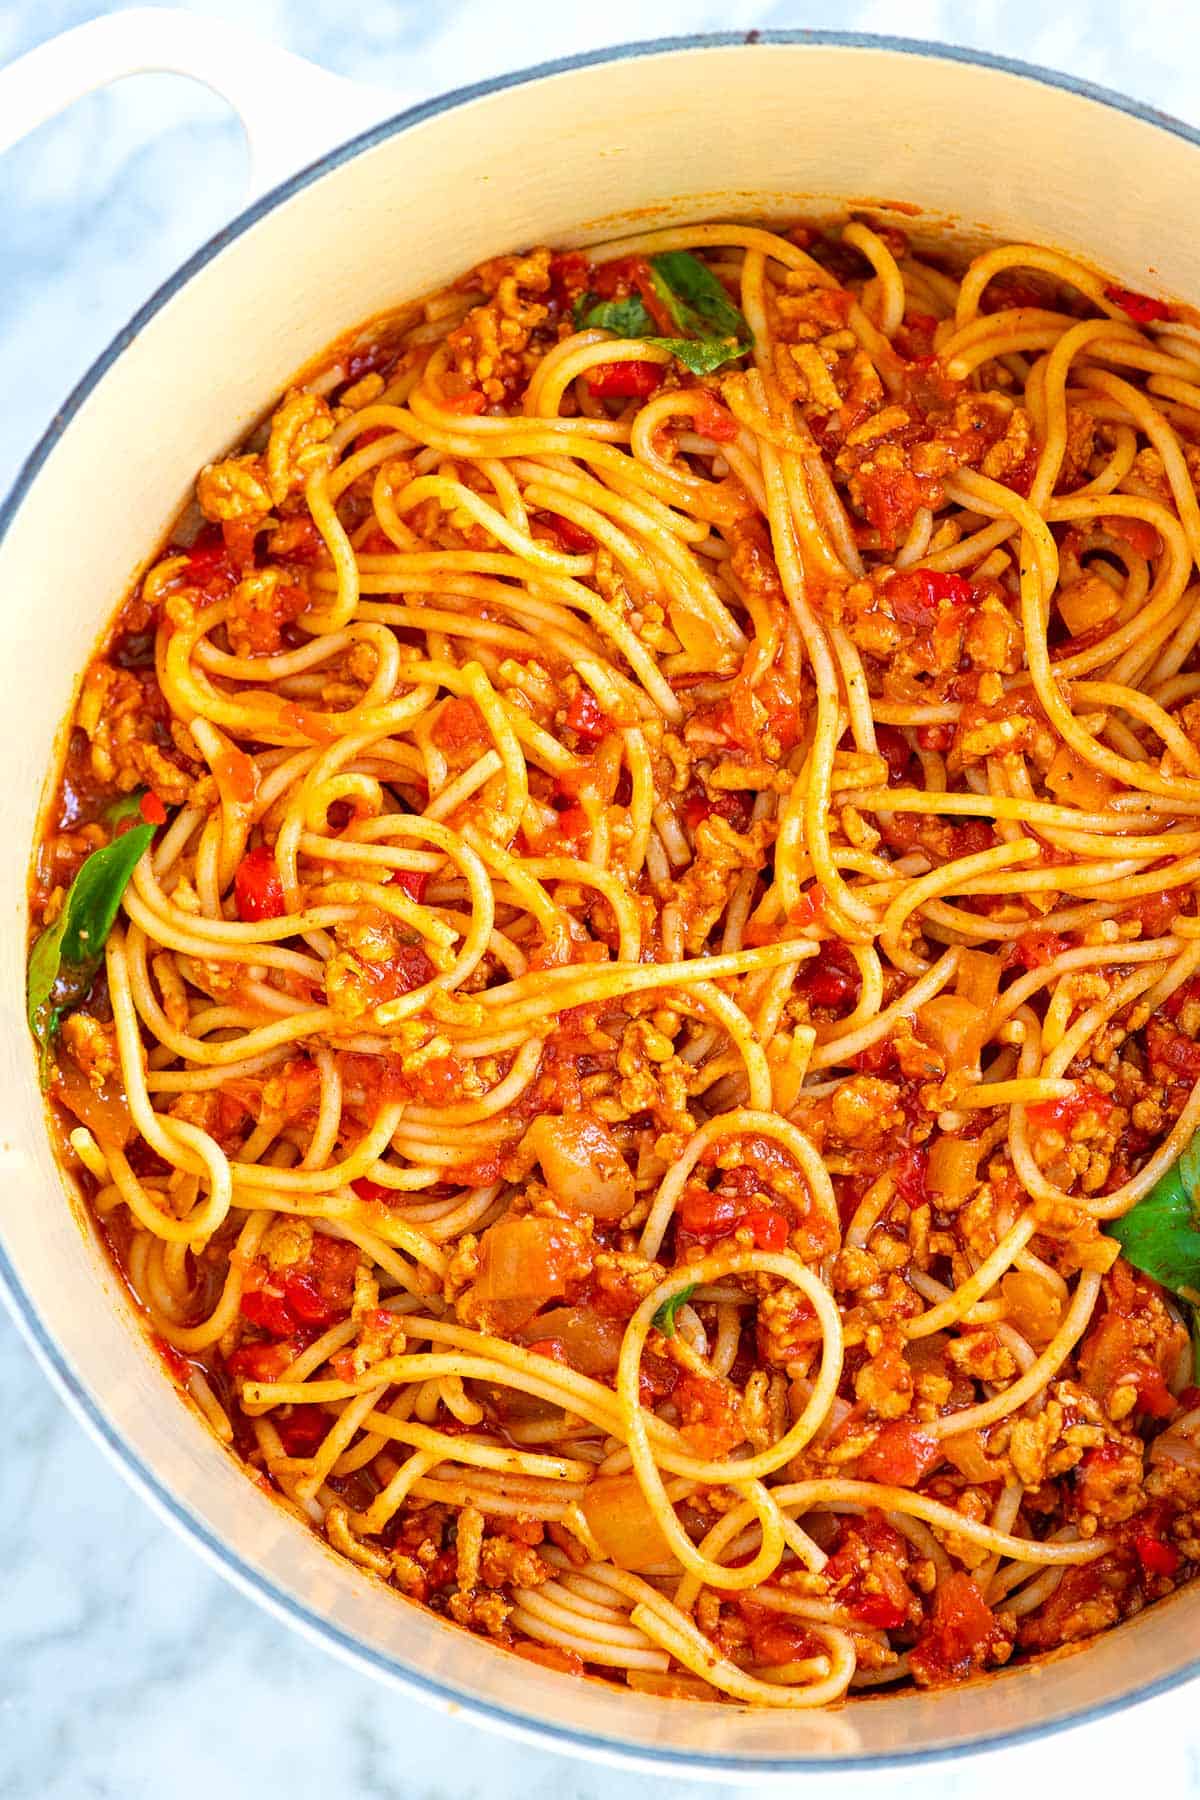 Easy Weeknight Spaghetti With Meat Sauce Recipe